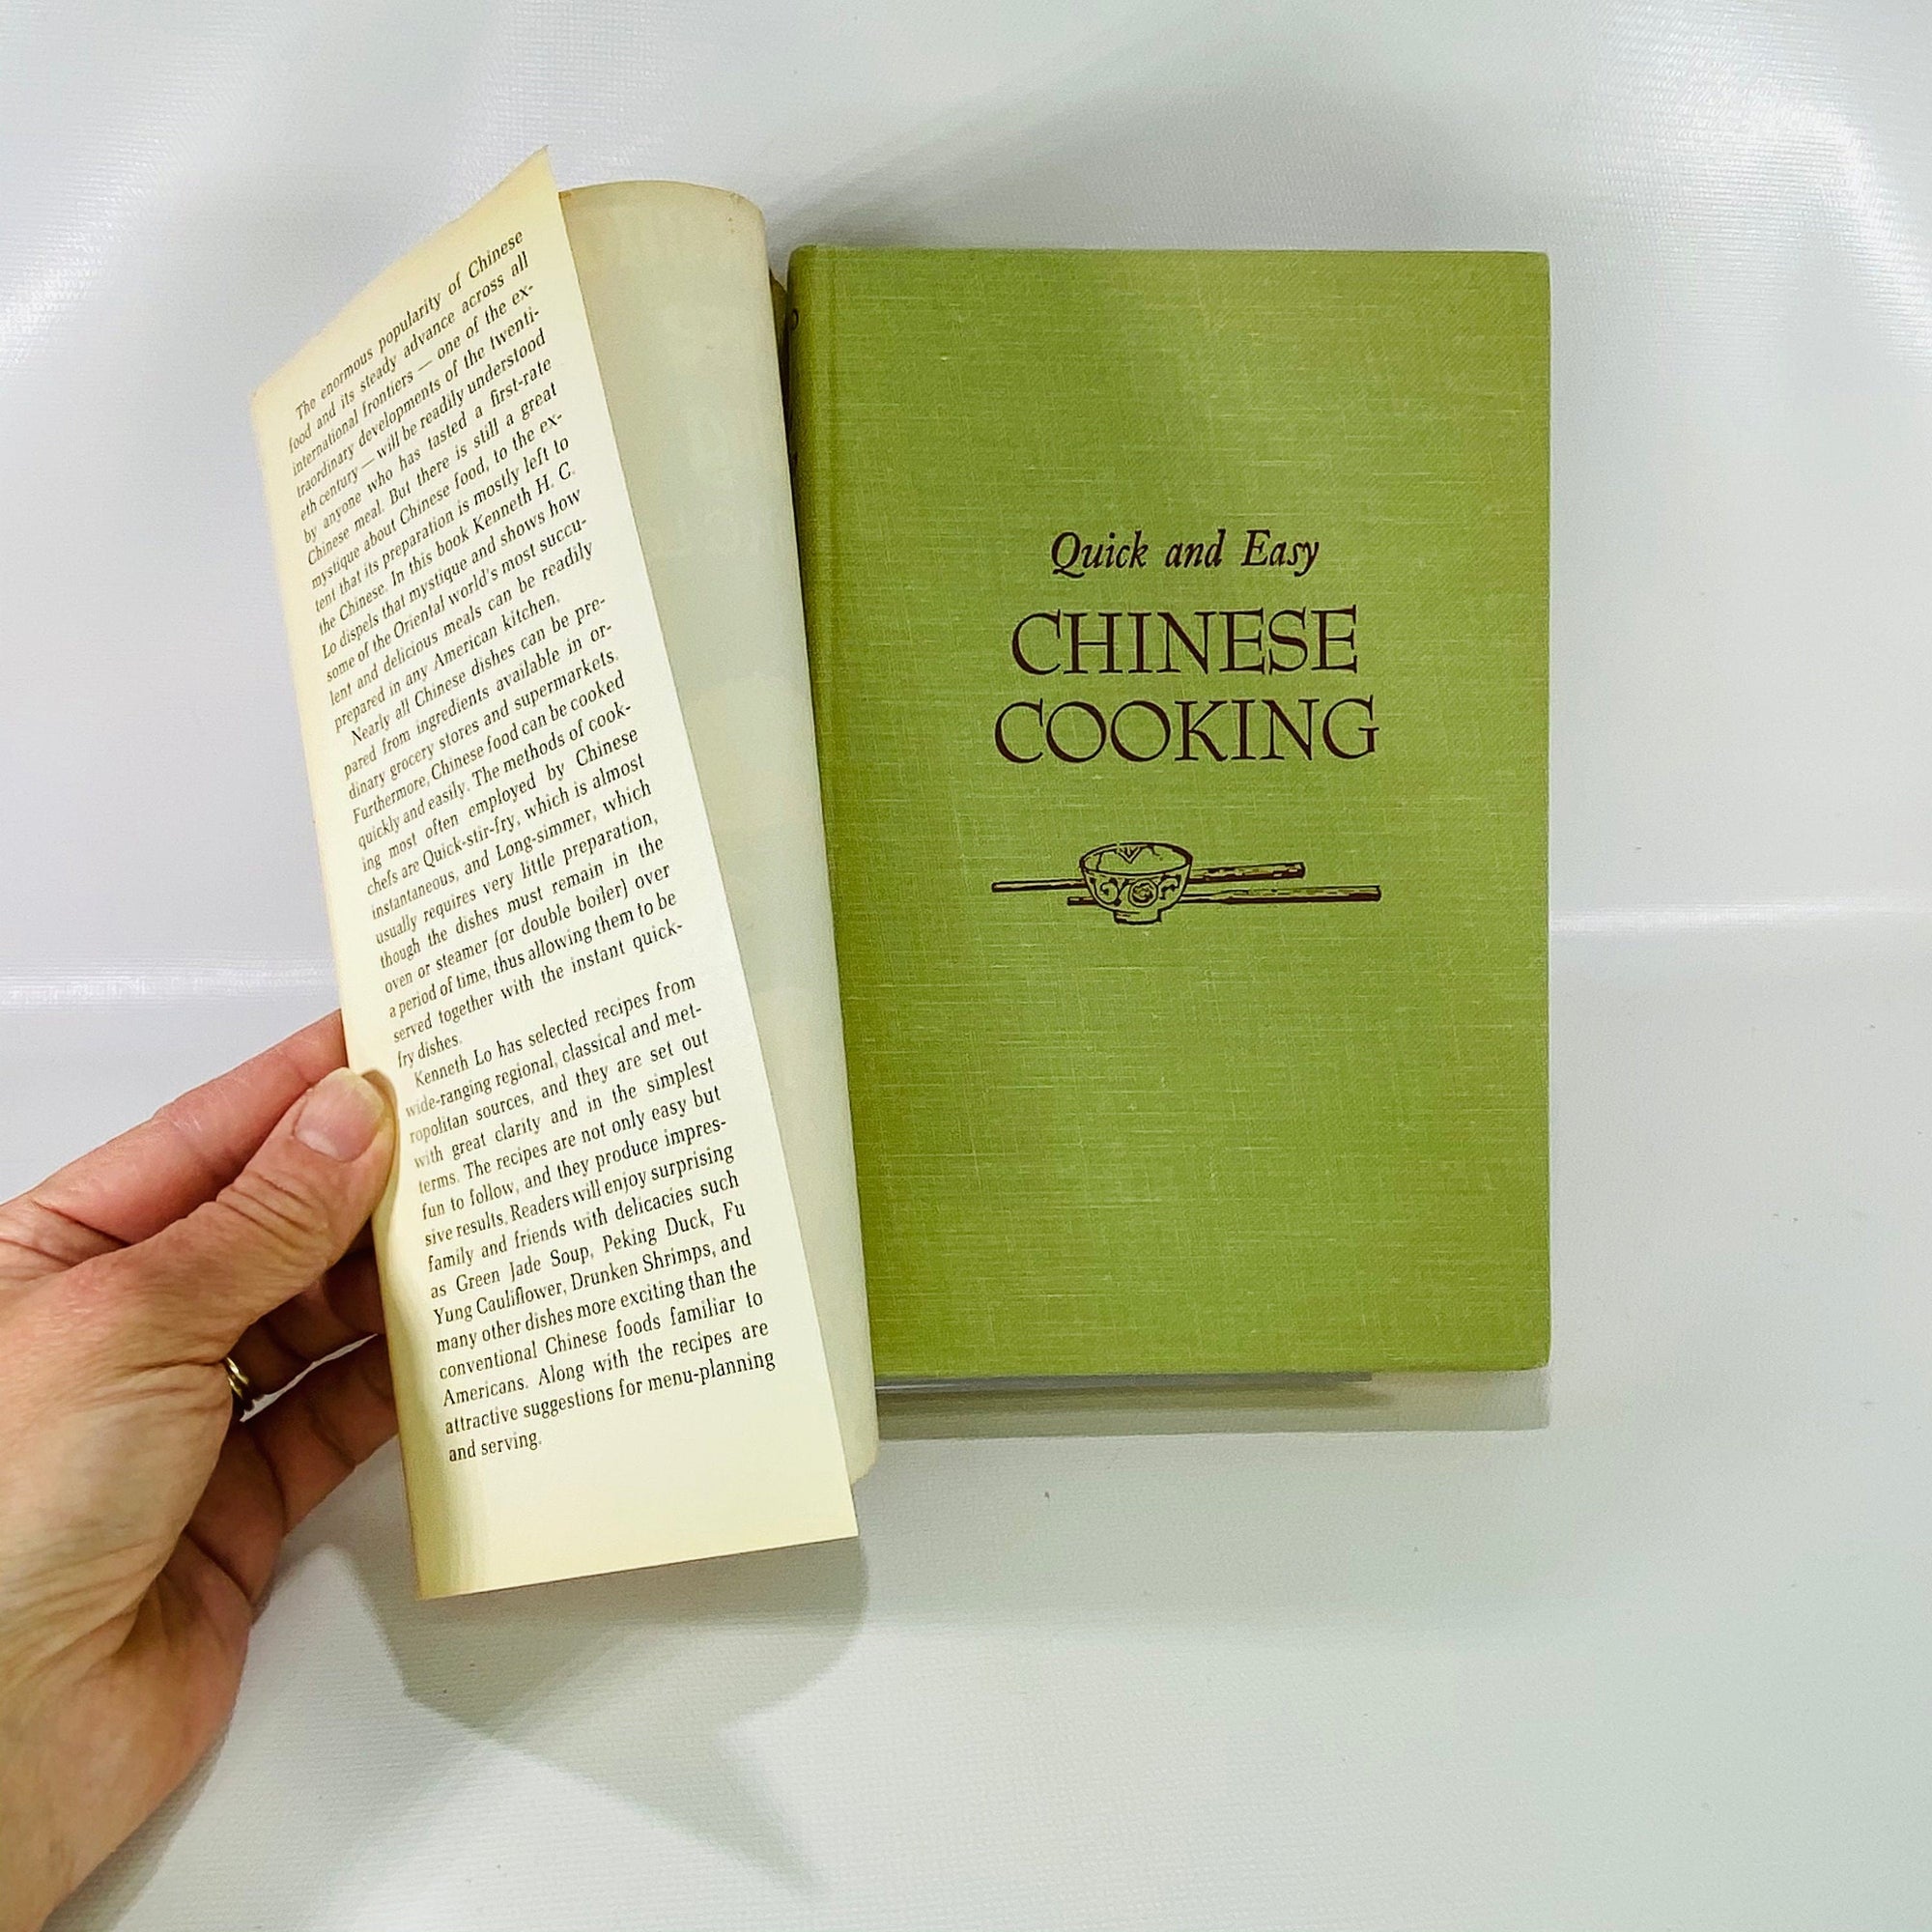 Quick and Easy Chinese Cooking by Kenneth H.C.Lo 1972 Houghton Mifflin Company Vintage Book